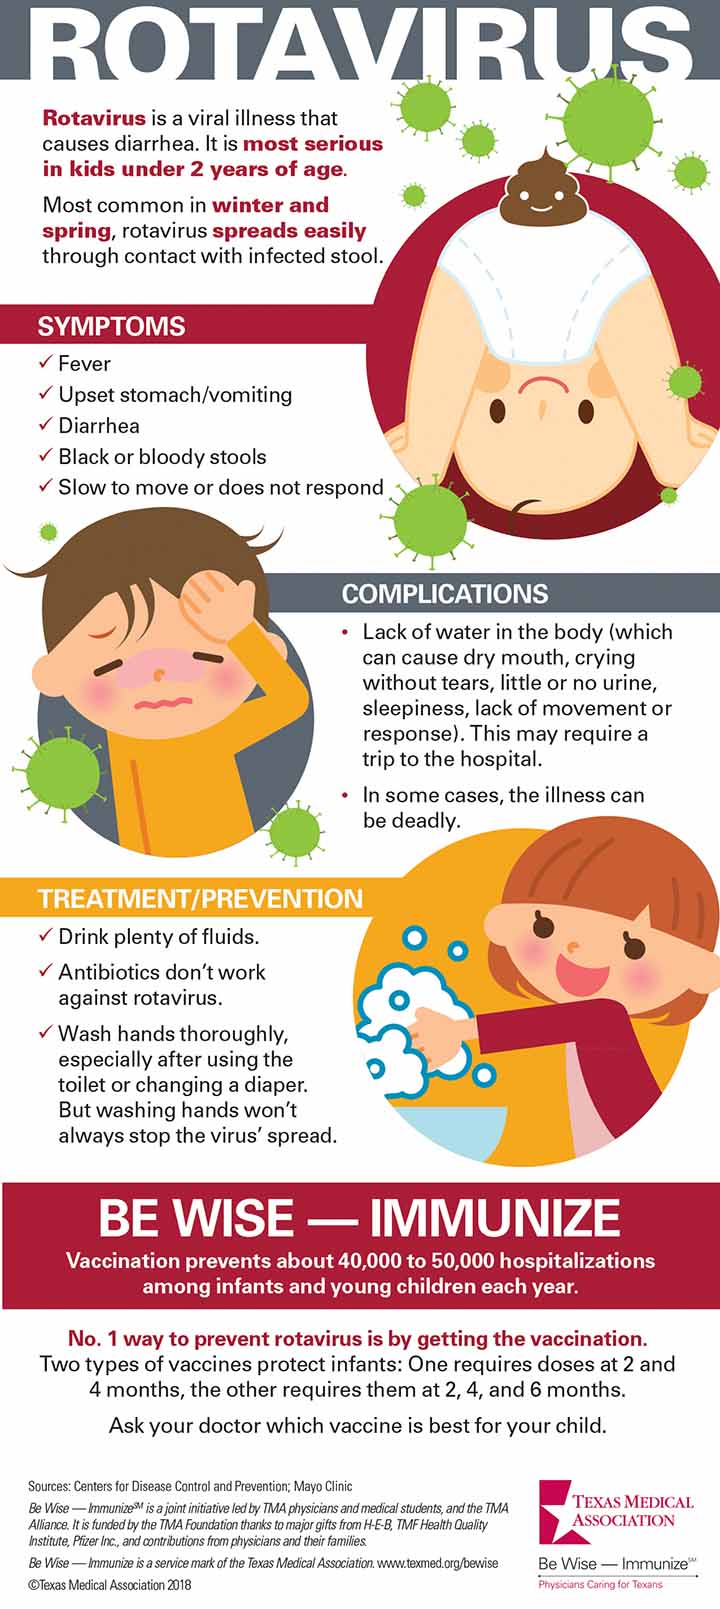 Talk to Your Patients About Rotavirus